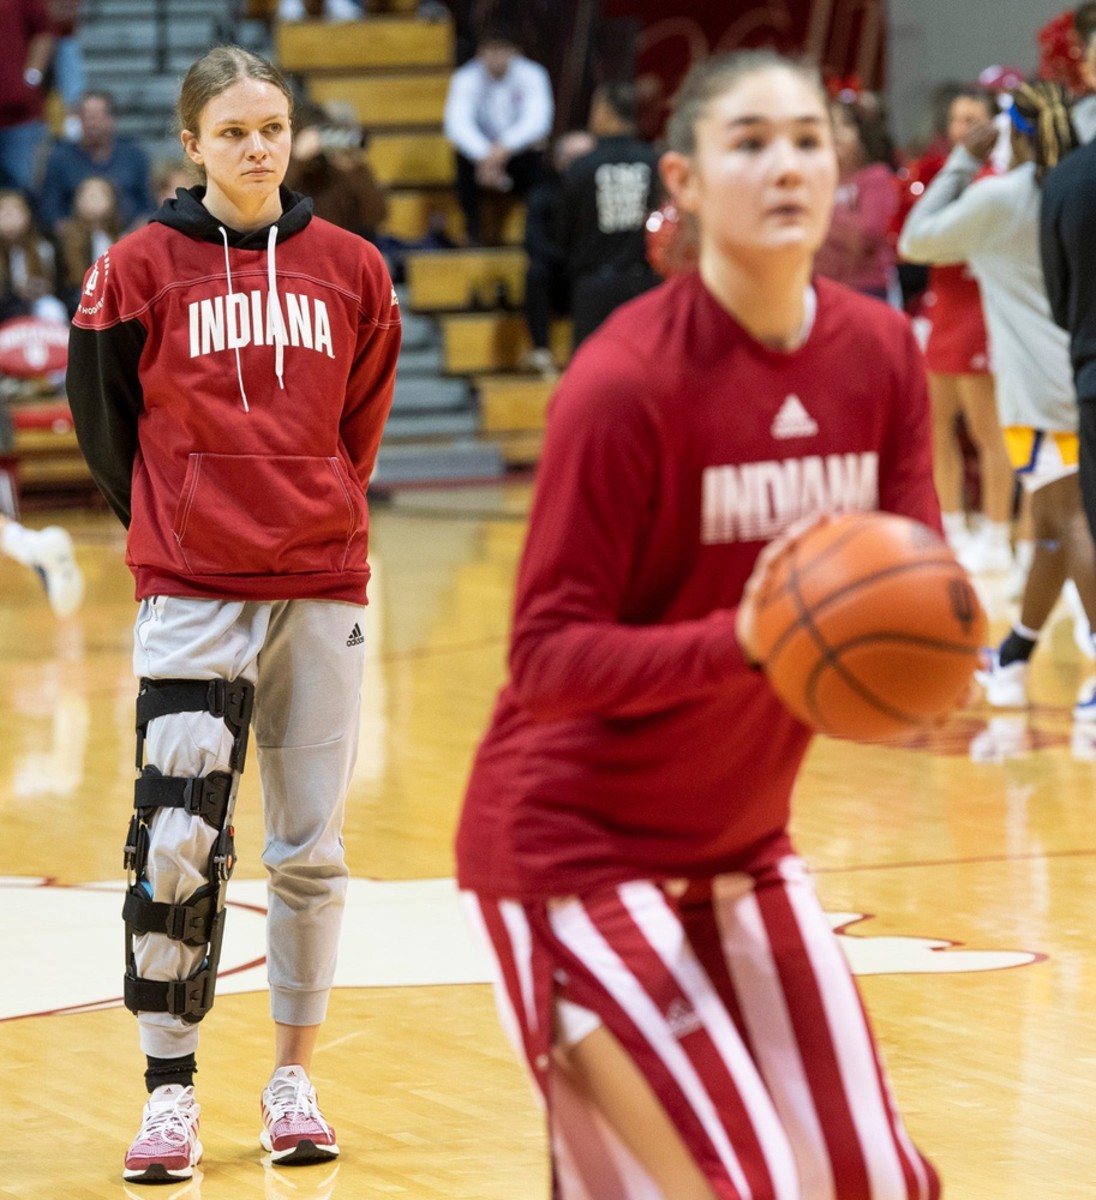 Indiana's Grace Berger (34) watches her teammates warm up before the Indiana versus Morehead State women's basketball game at Simon Skjodt Assembly Hall on Sunday, Dec. 18, 2022.